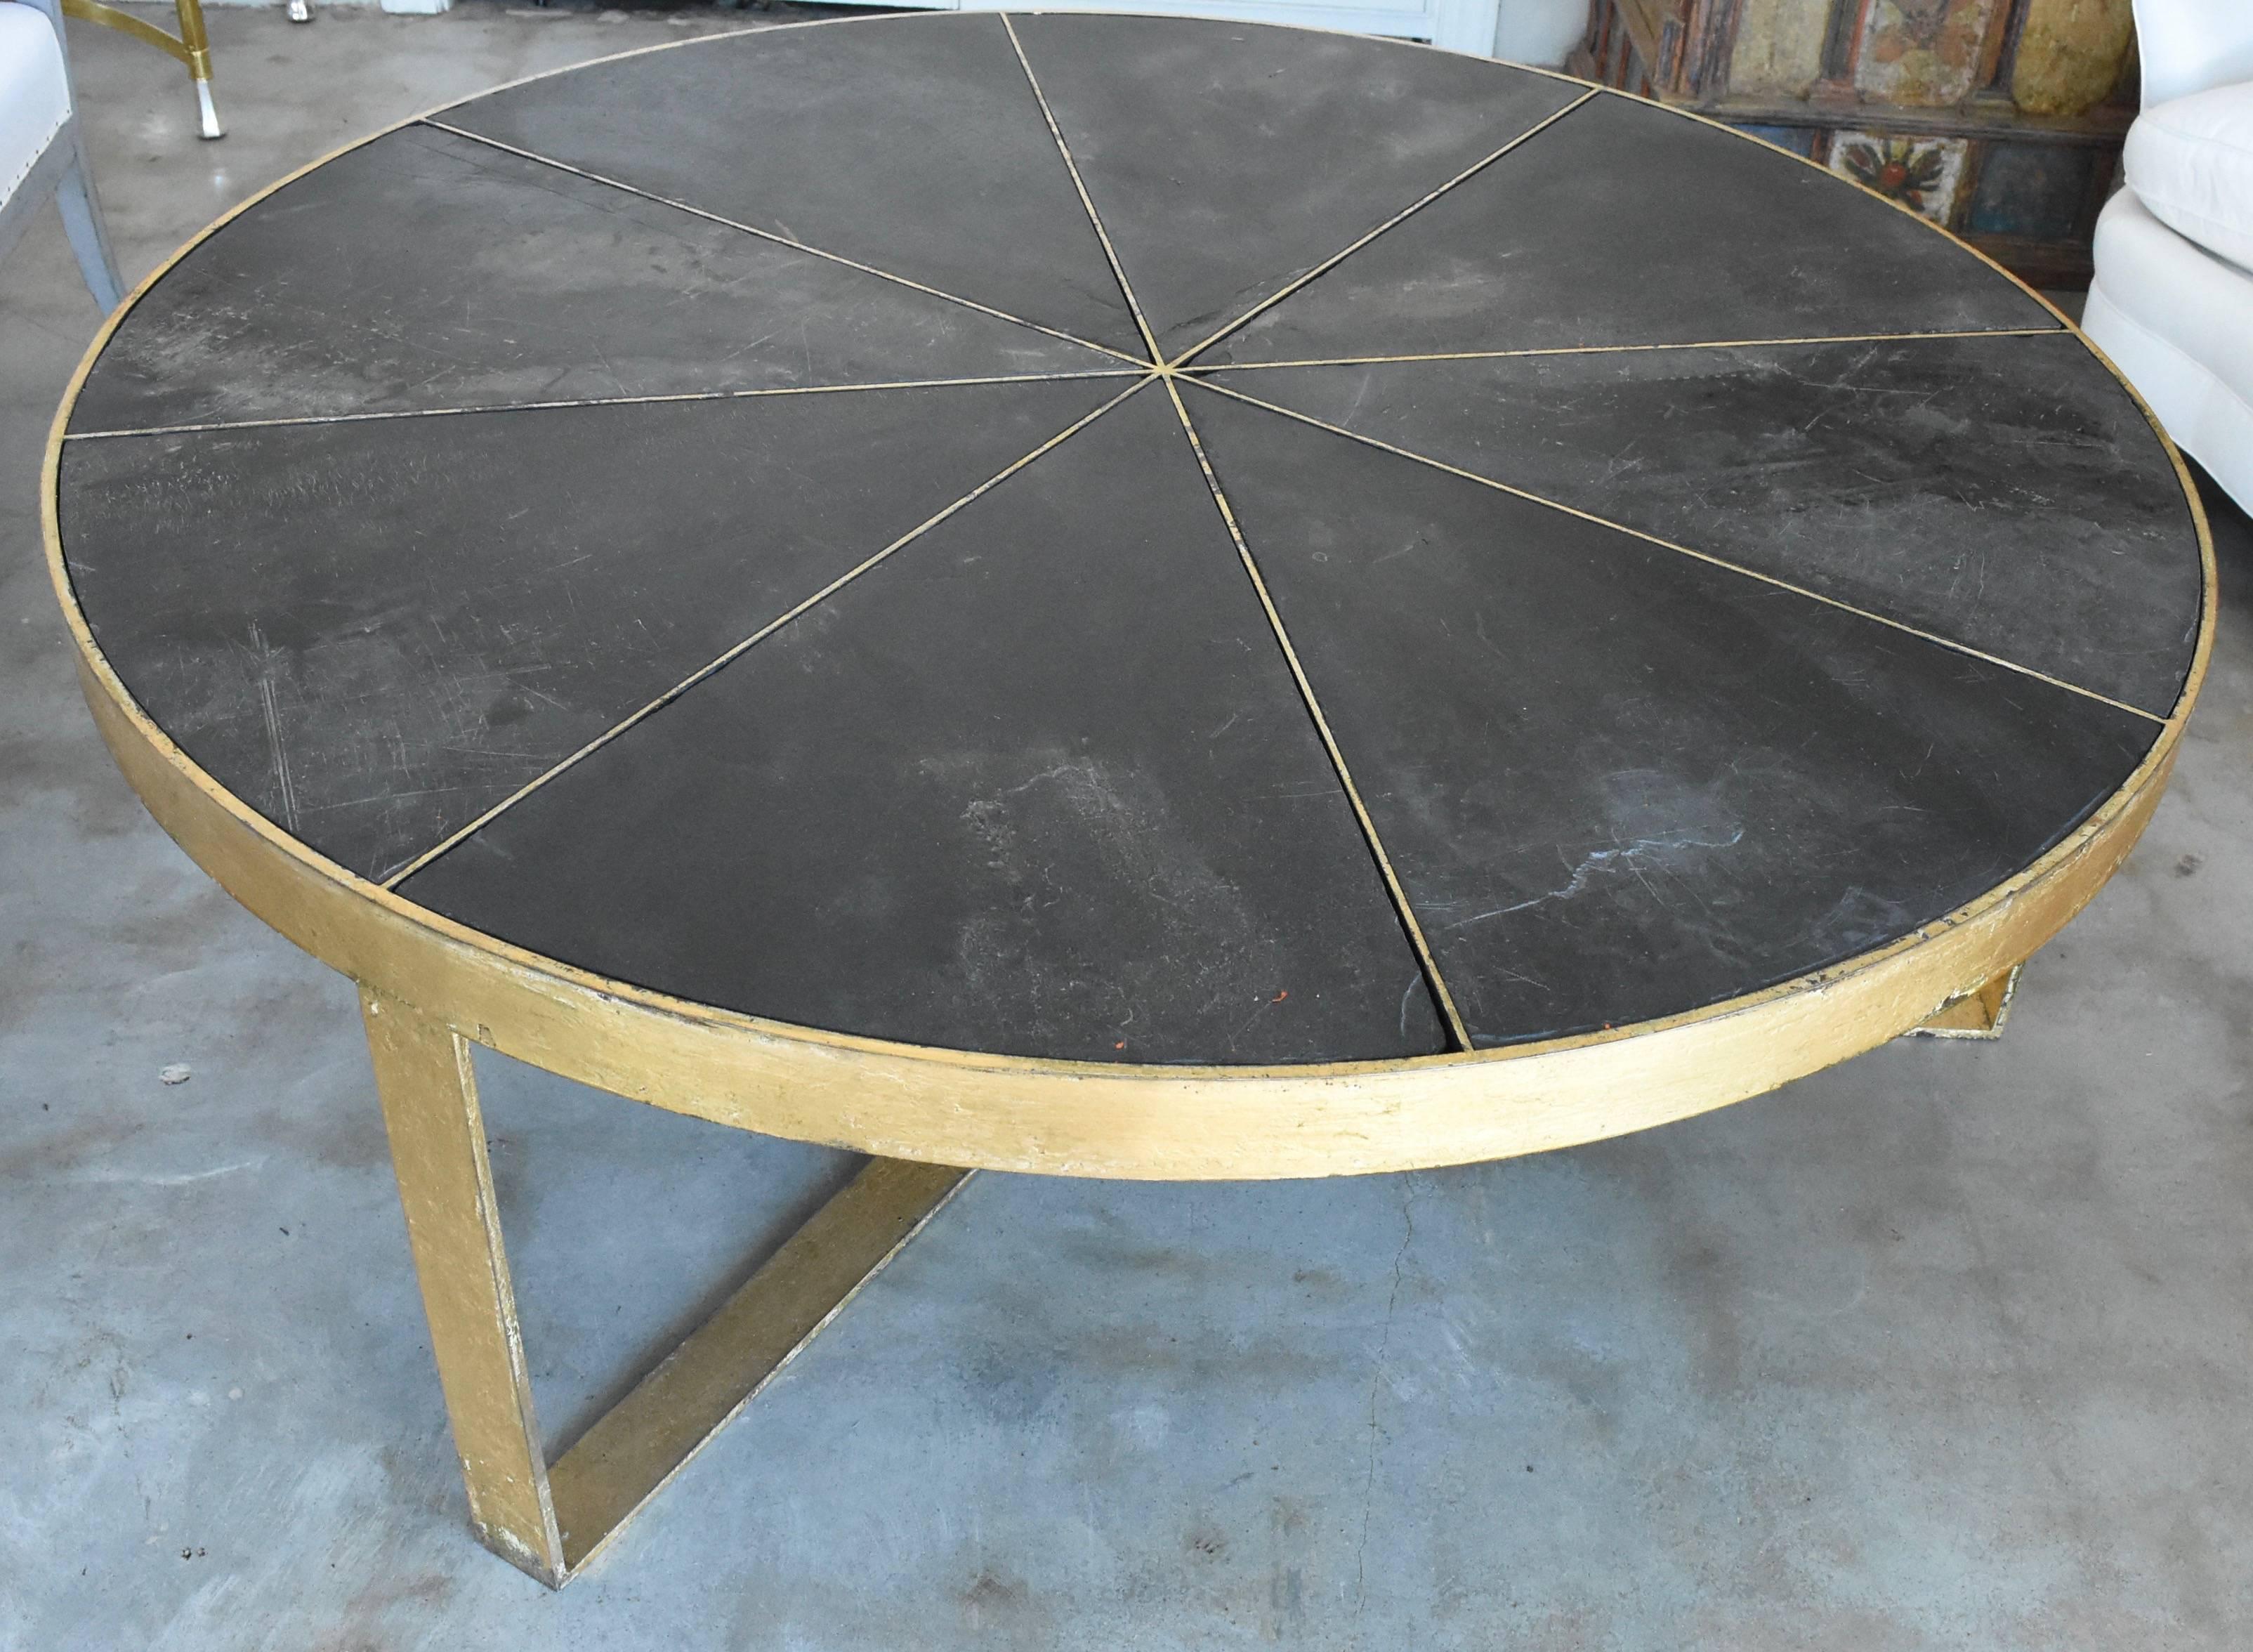 This is fabricated for me in Spain. It is beautifully made with steel then gold leaf. It features slate that insets into the pie shaped top that can be removed for shipping. This one is sold and another is in transit and due in February 2019
I have